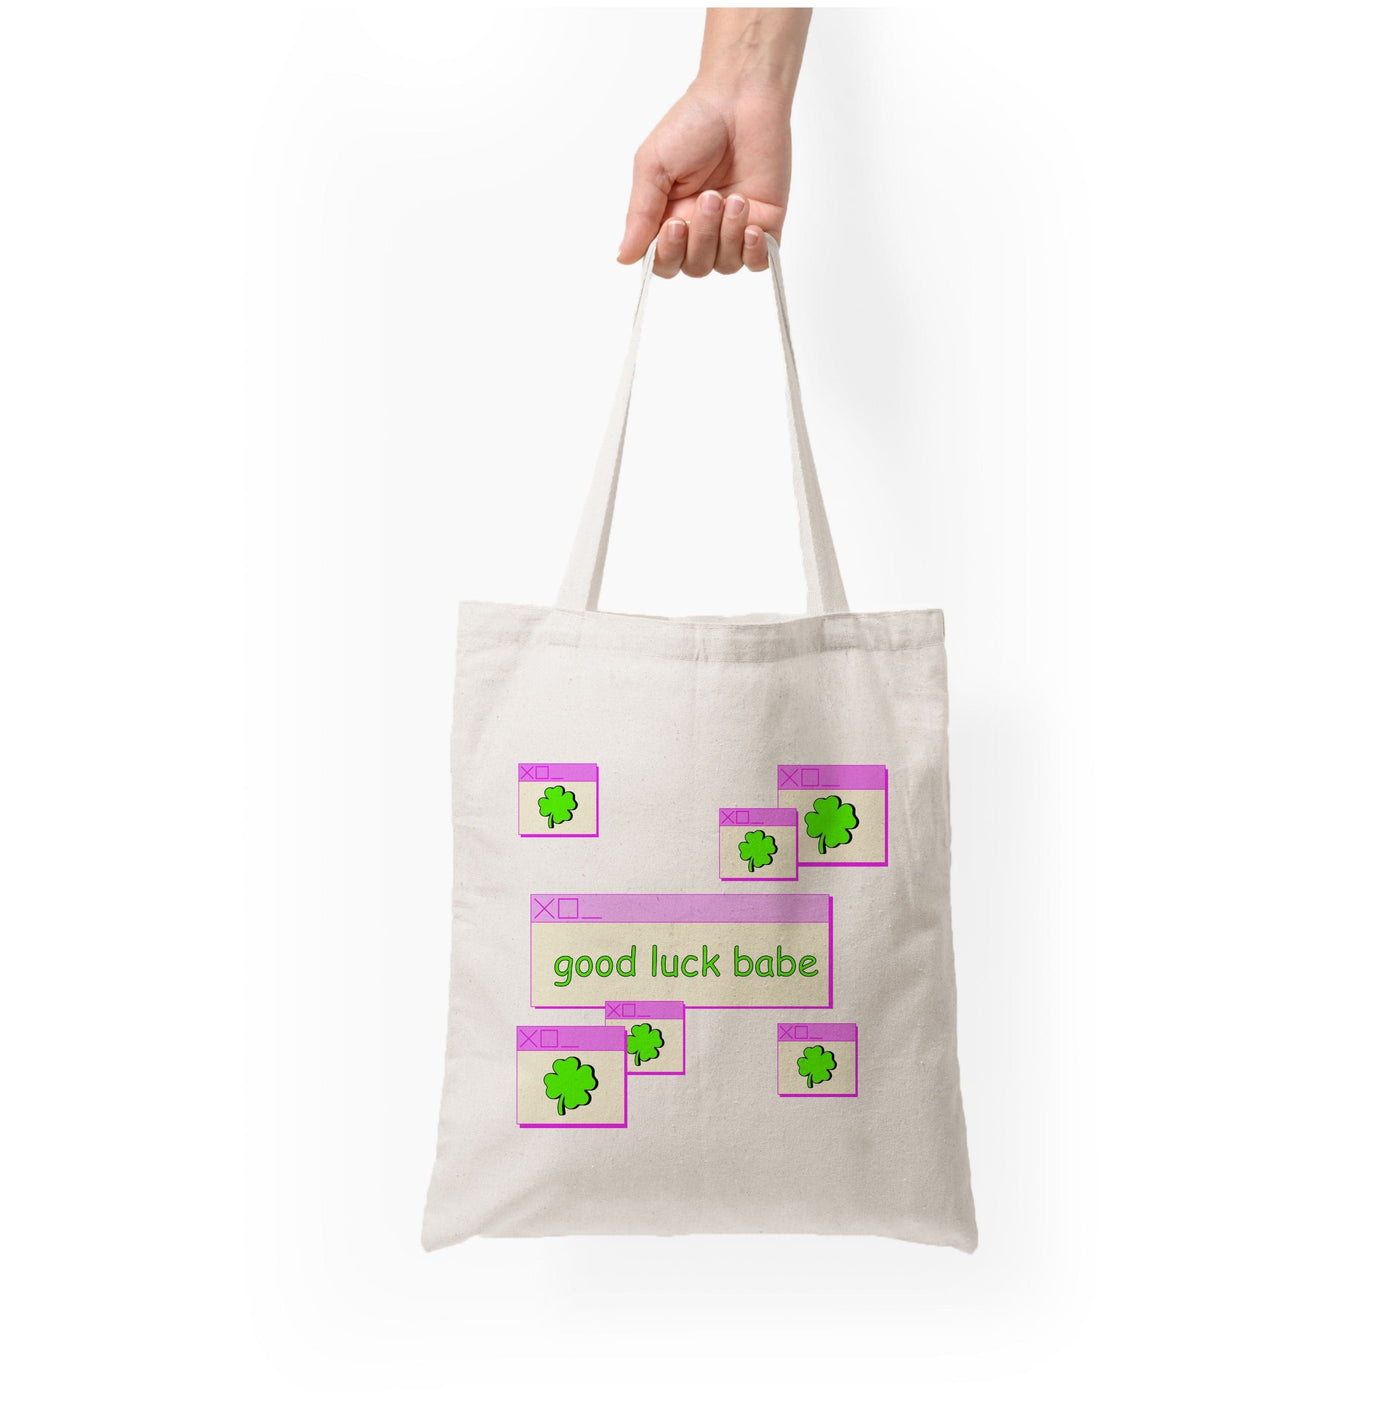 Good Luck Babe - Chappell Roan Tote Bag